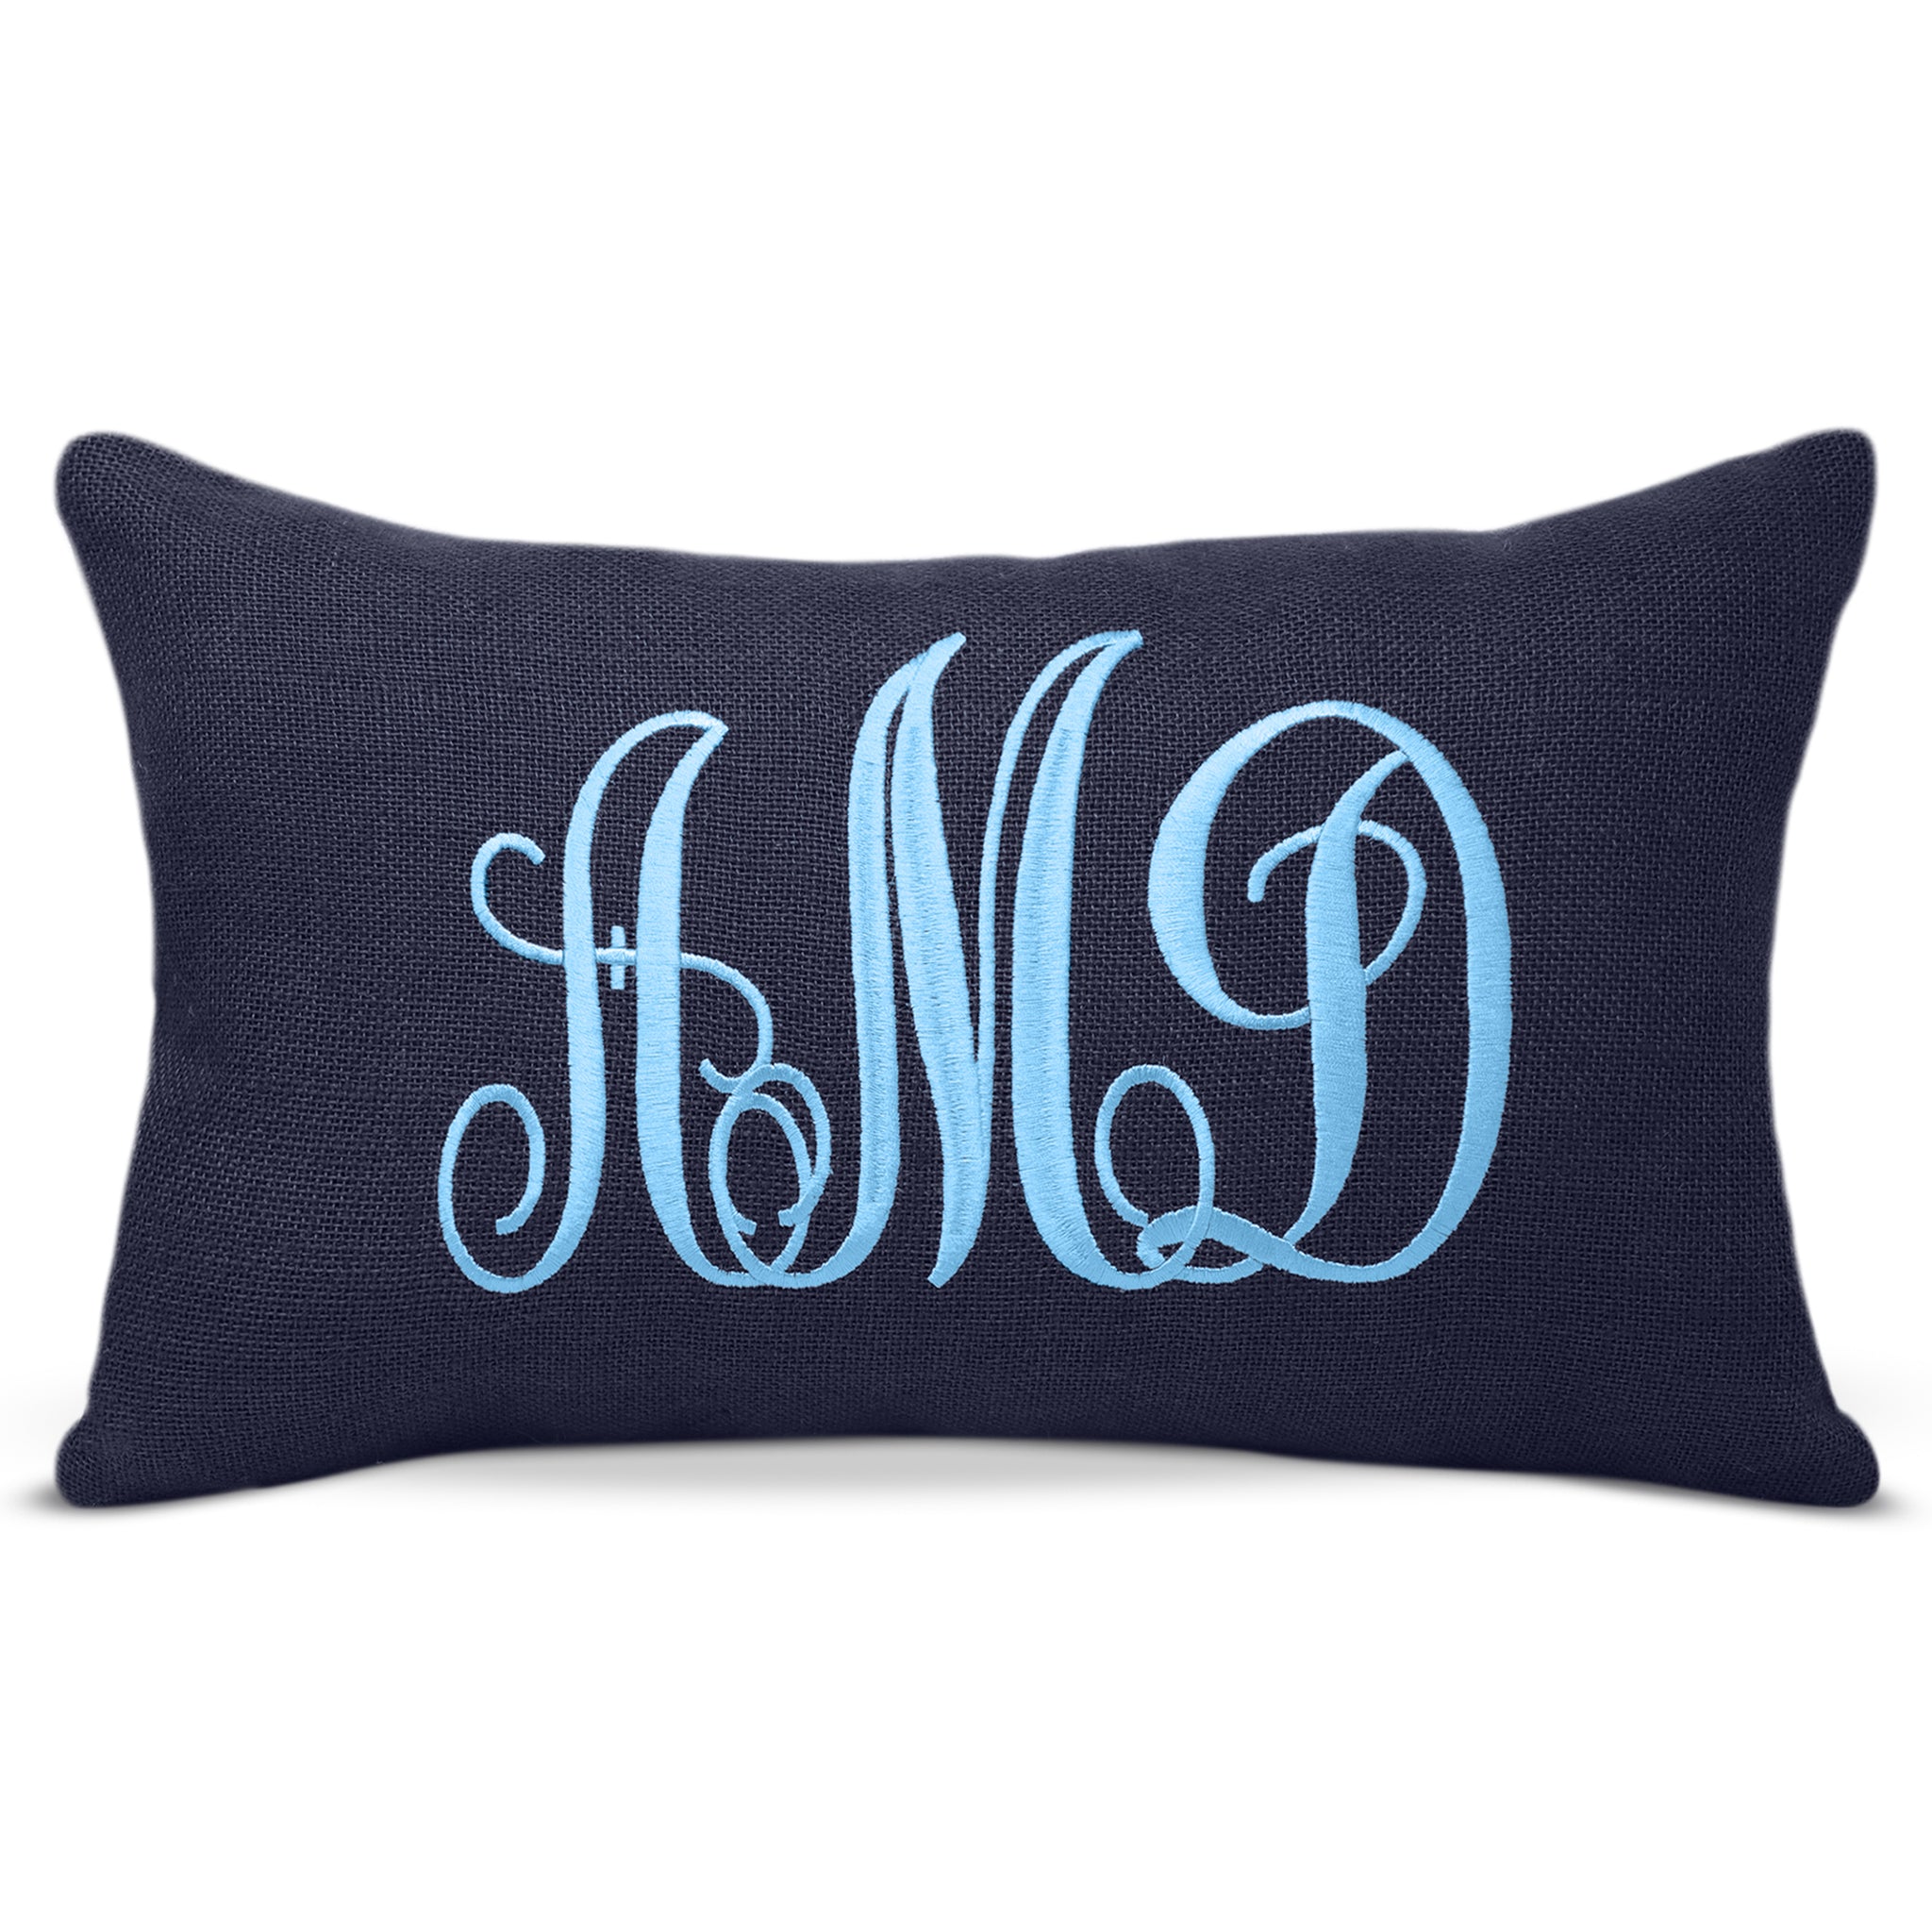 Monogram Personalized Throw Pillow Cover